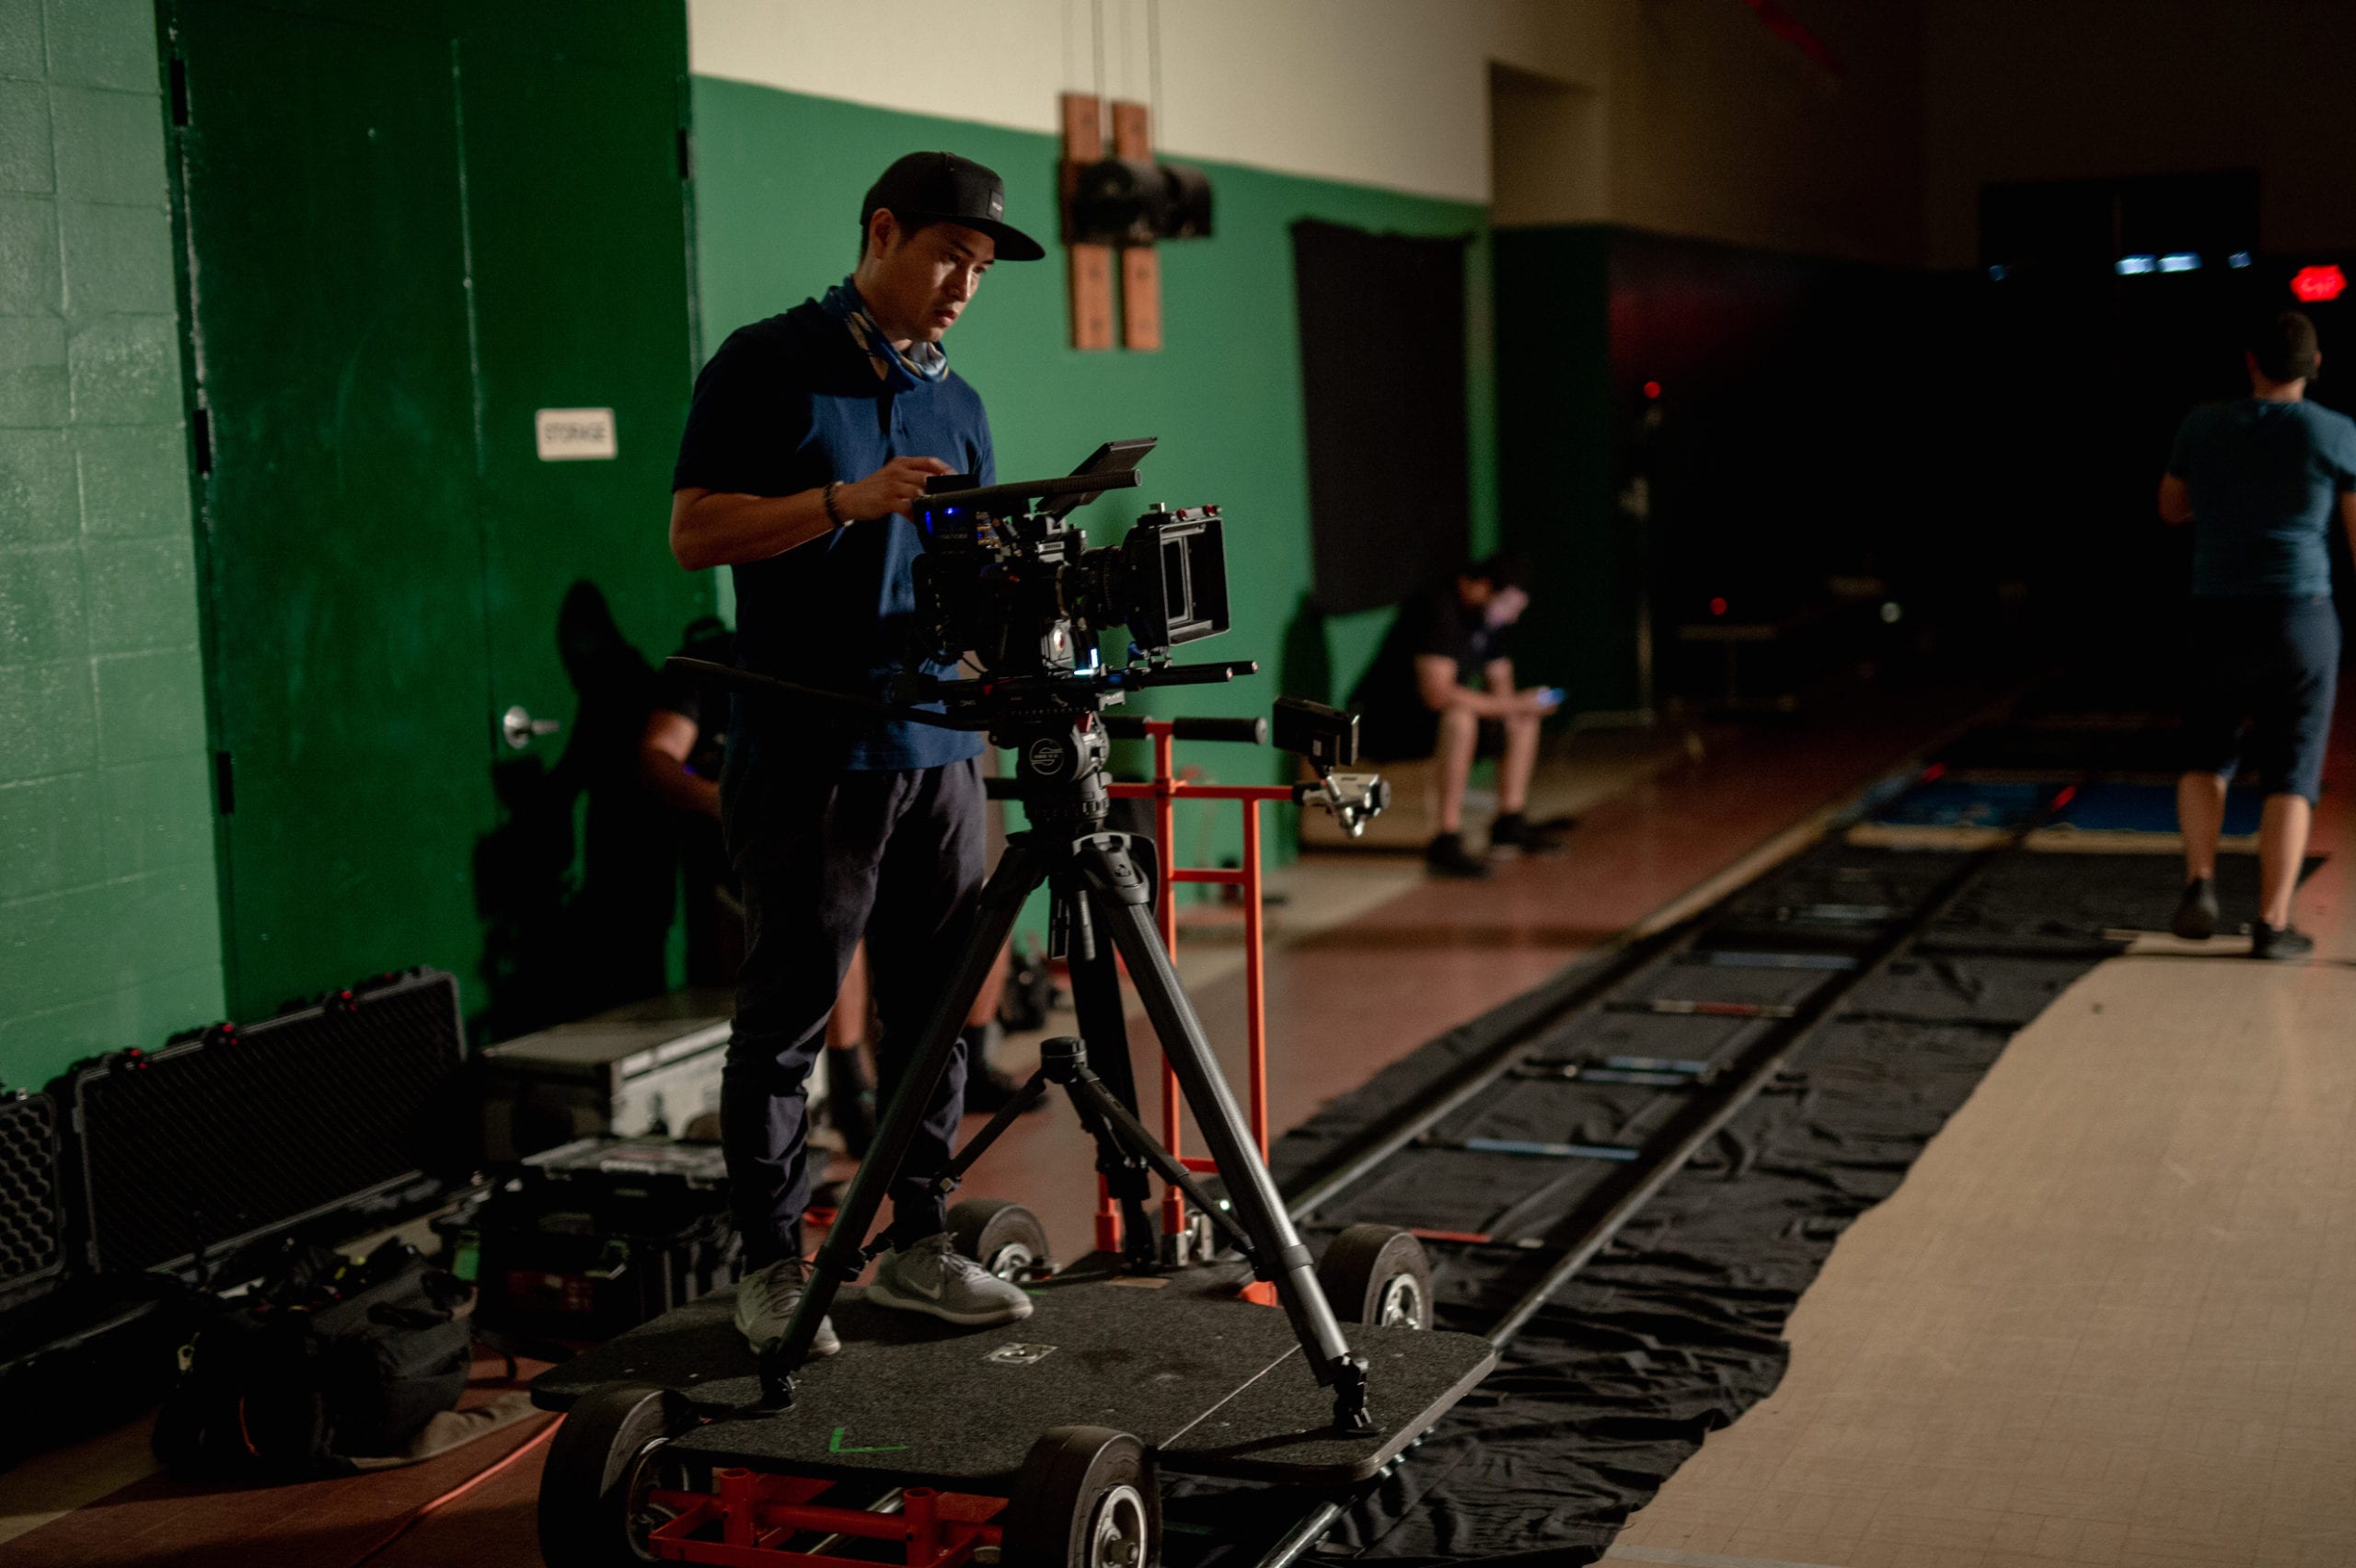 Nike Film crew working on equipment for a scene